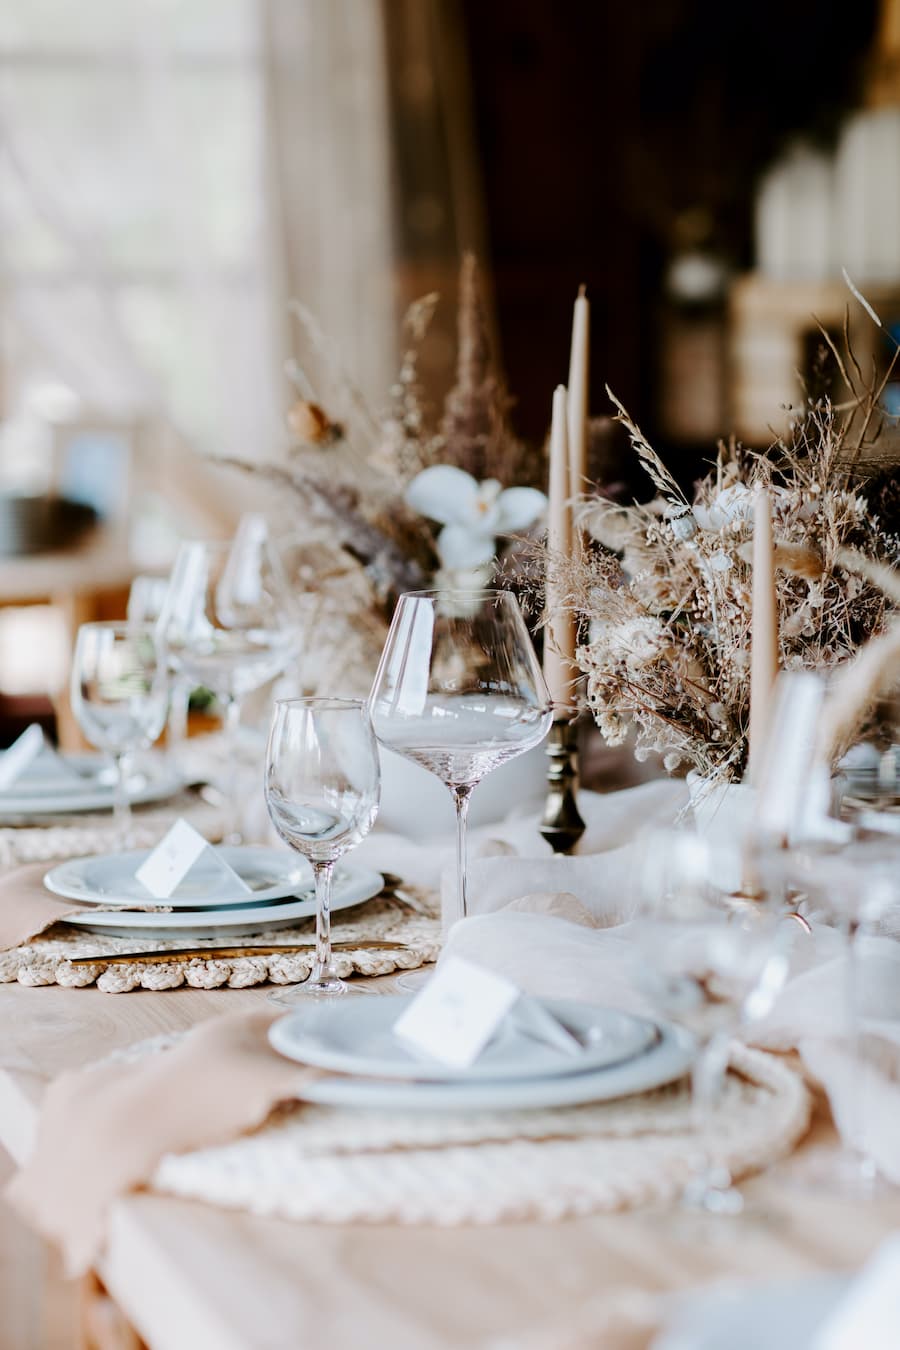 Beautiful tablescape setting with white china, glasses and neutral decorations